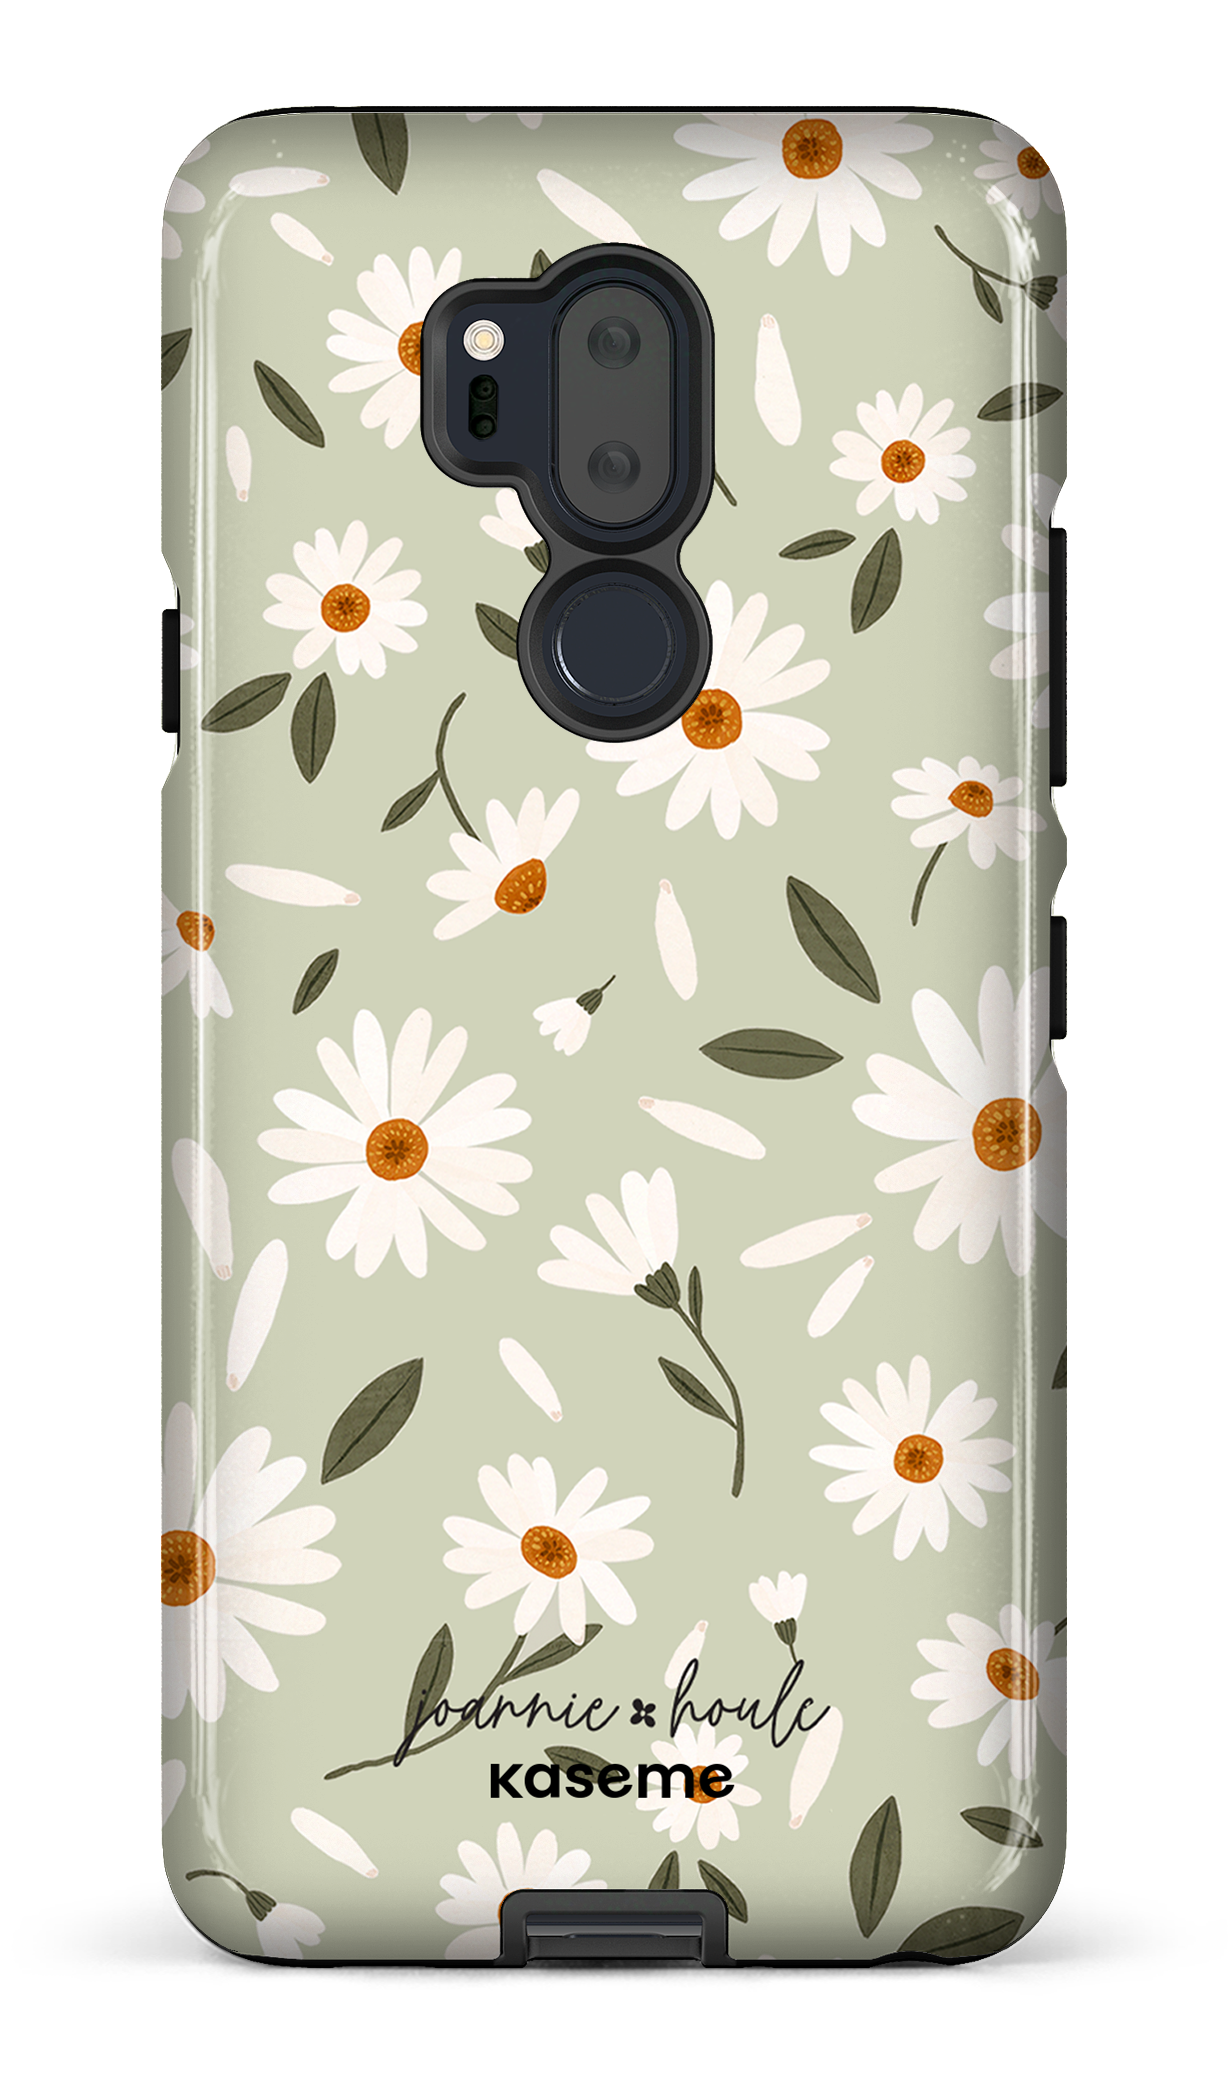 Daisy Bouquet Sage by Joannie Houle - LG G7